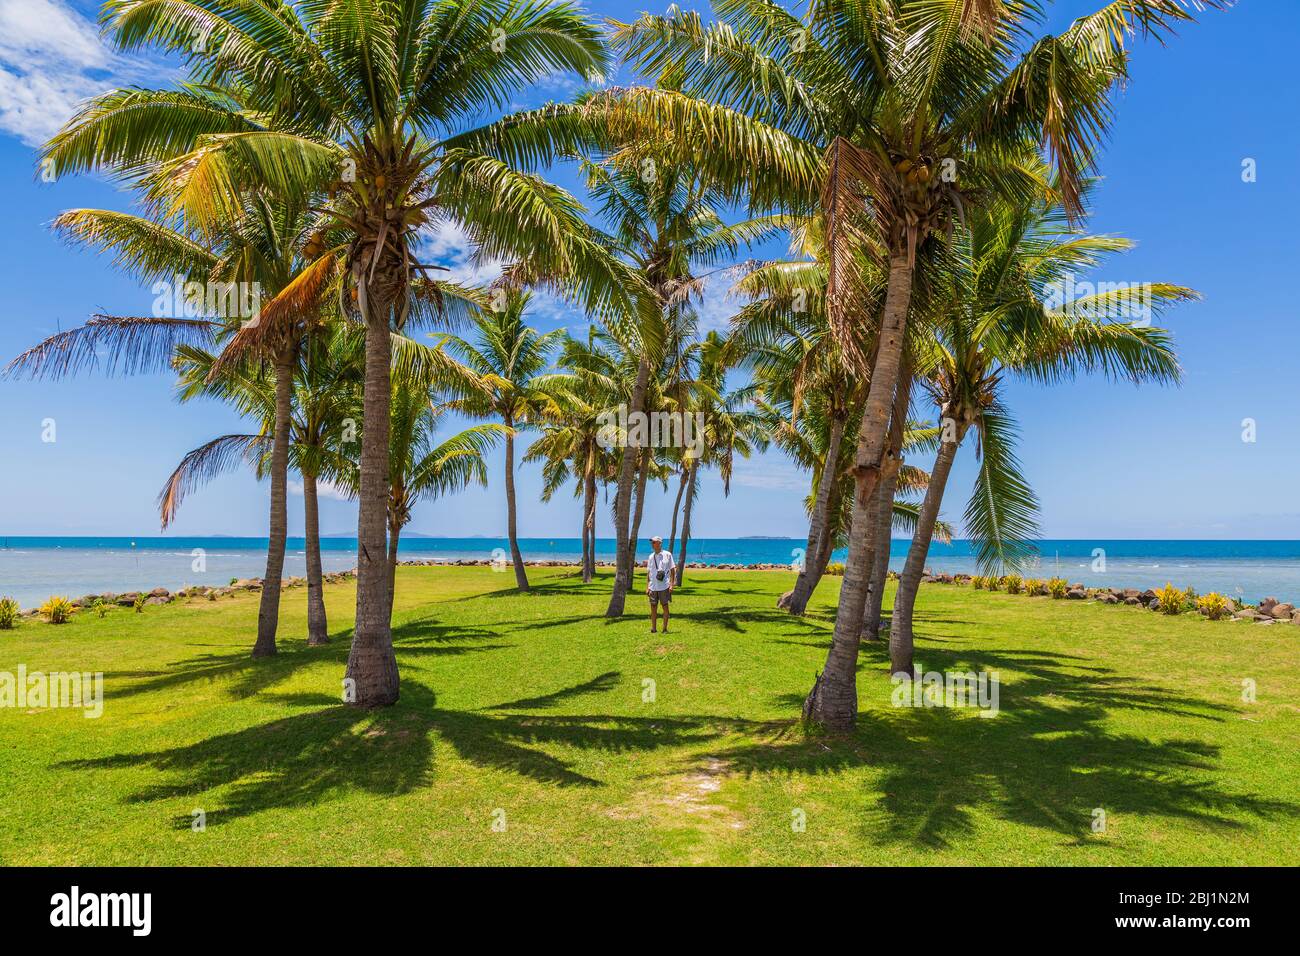 Elderly tourist standing among the palm trees next to the sea in Fiji. Stock Photo